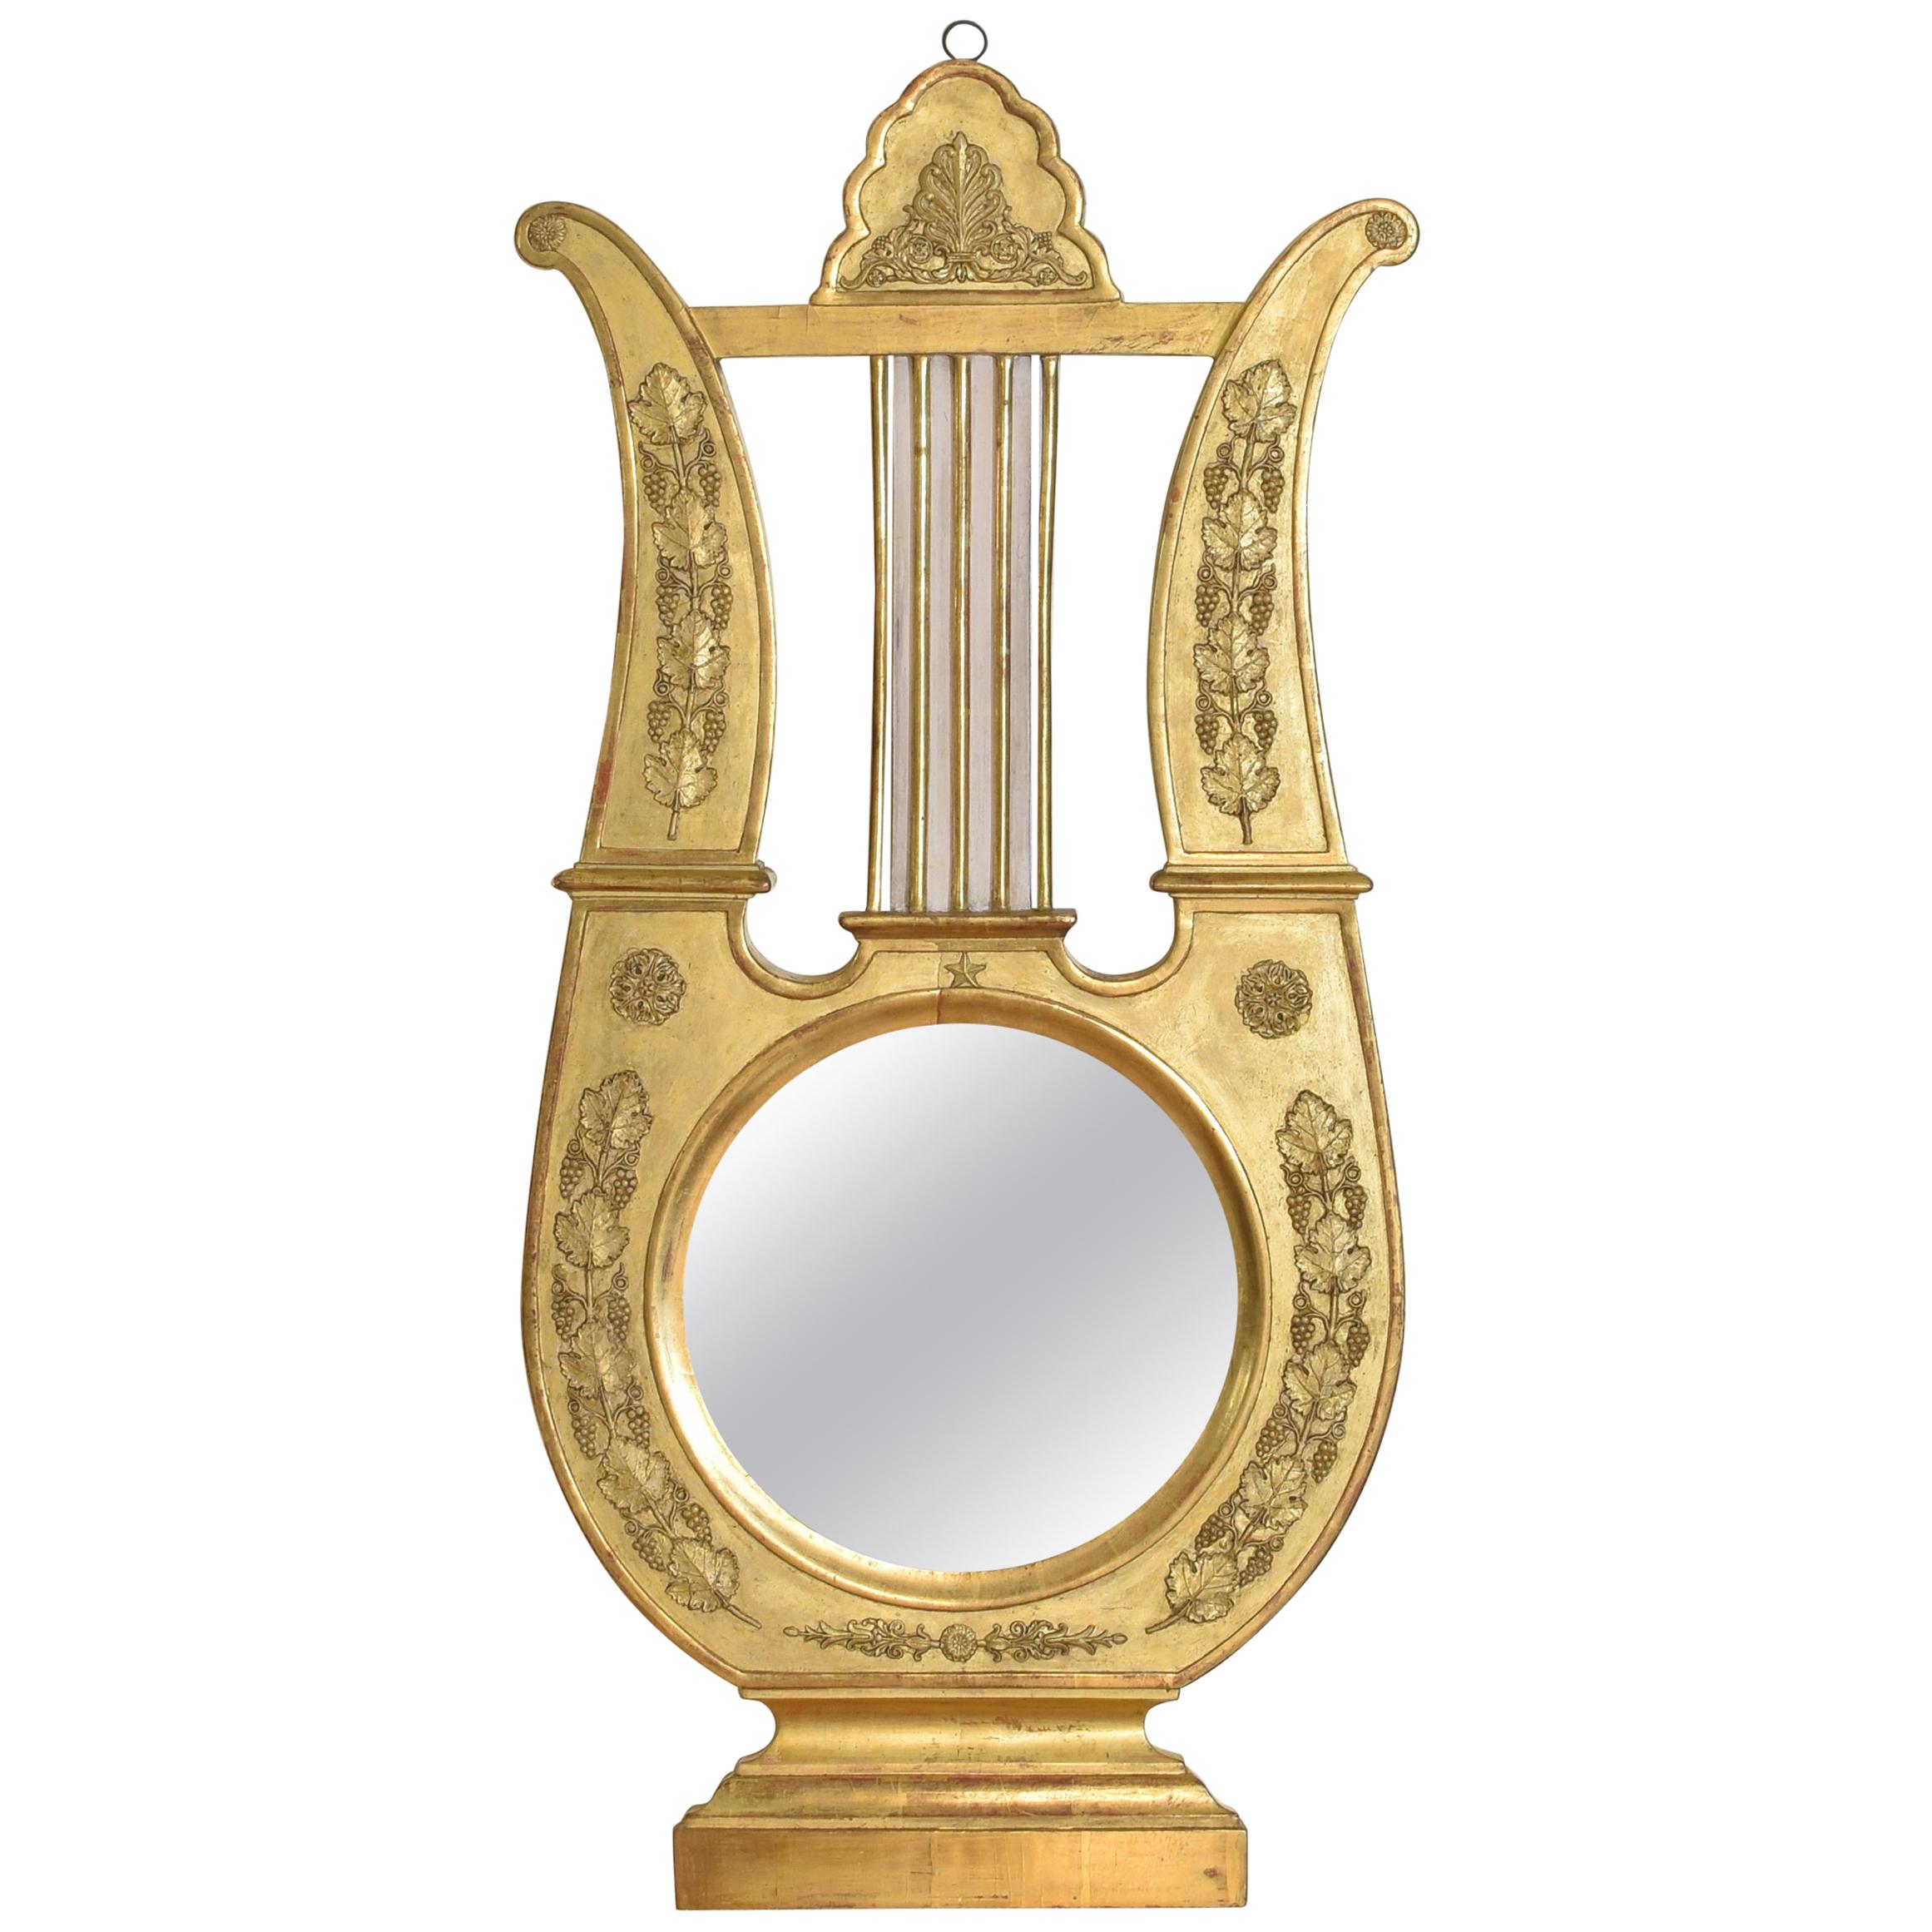 French Empire Period Carved Giltwood Mirror, Formerly a Barometer, 19th Century For Sale